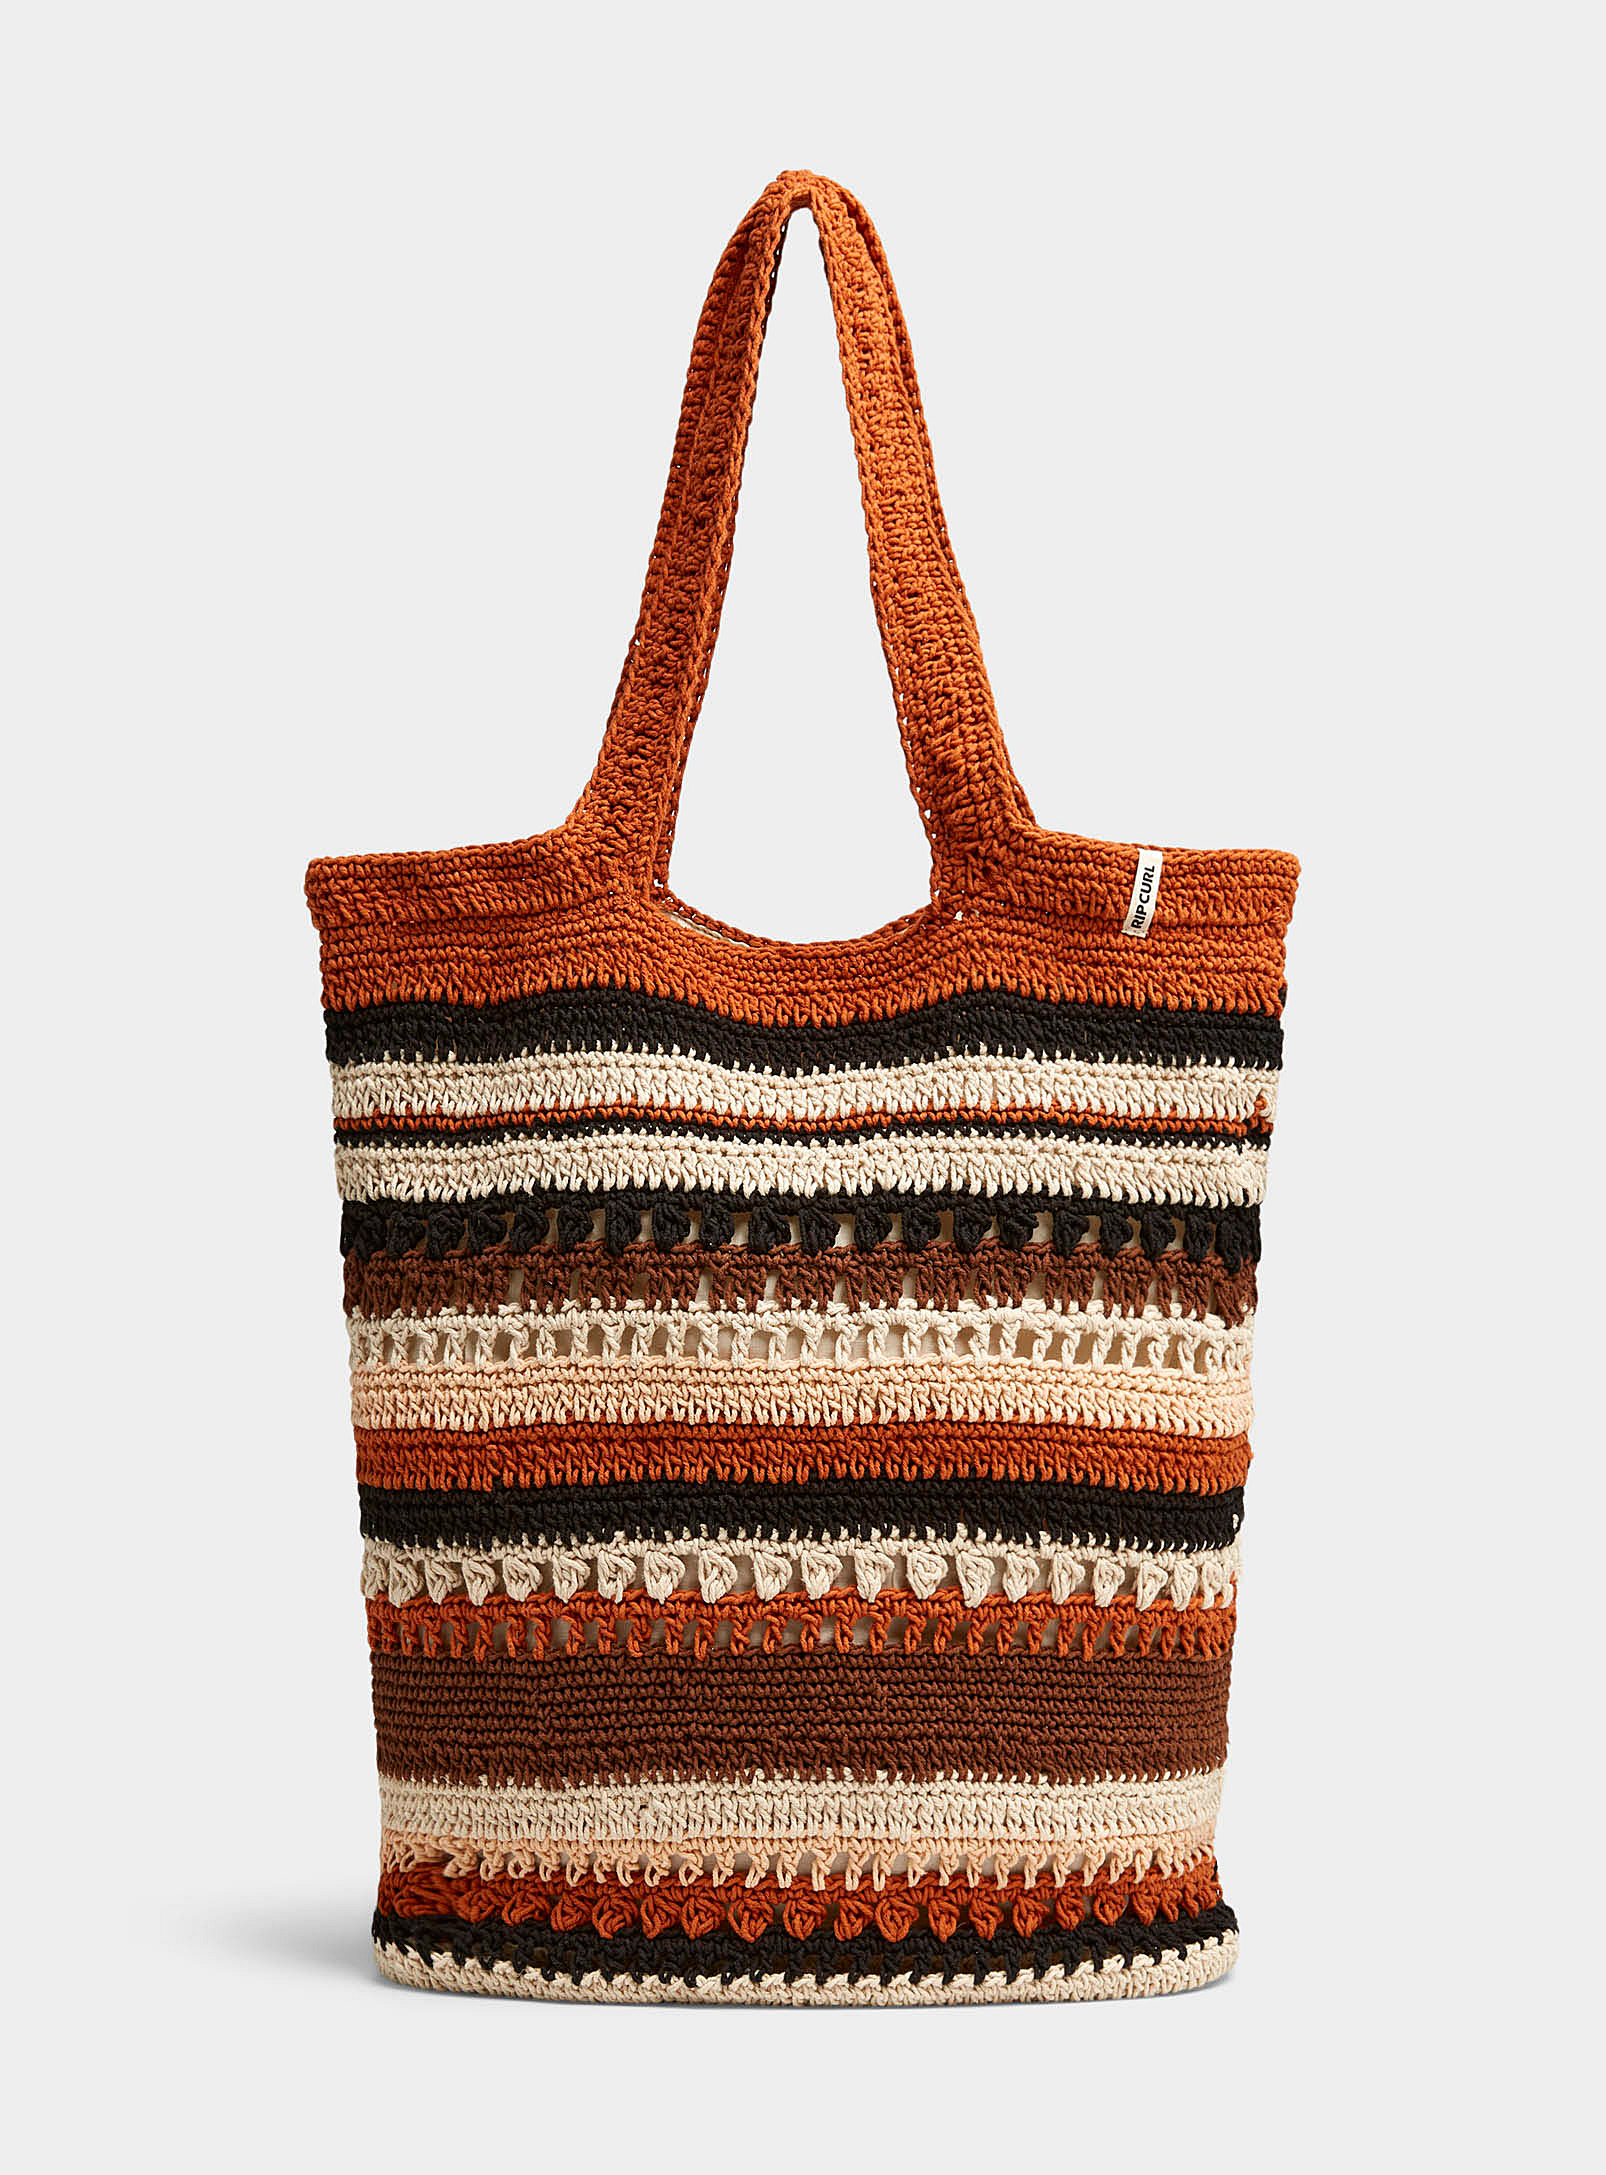 Rip Curl - Women's Lined crochet Tote Bag